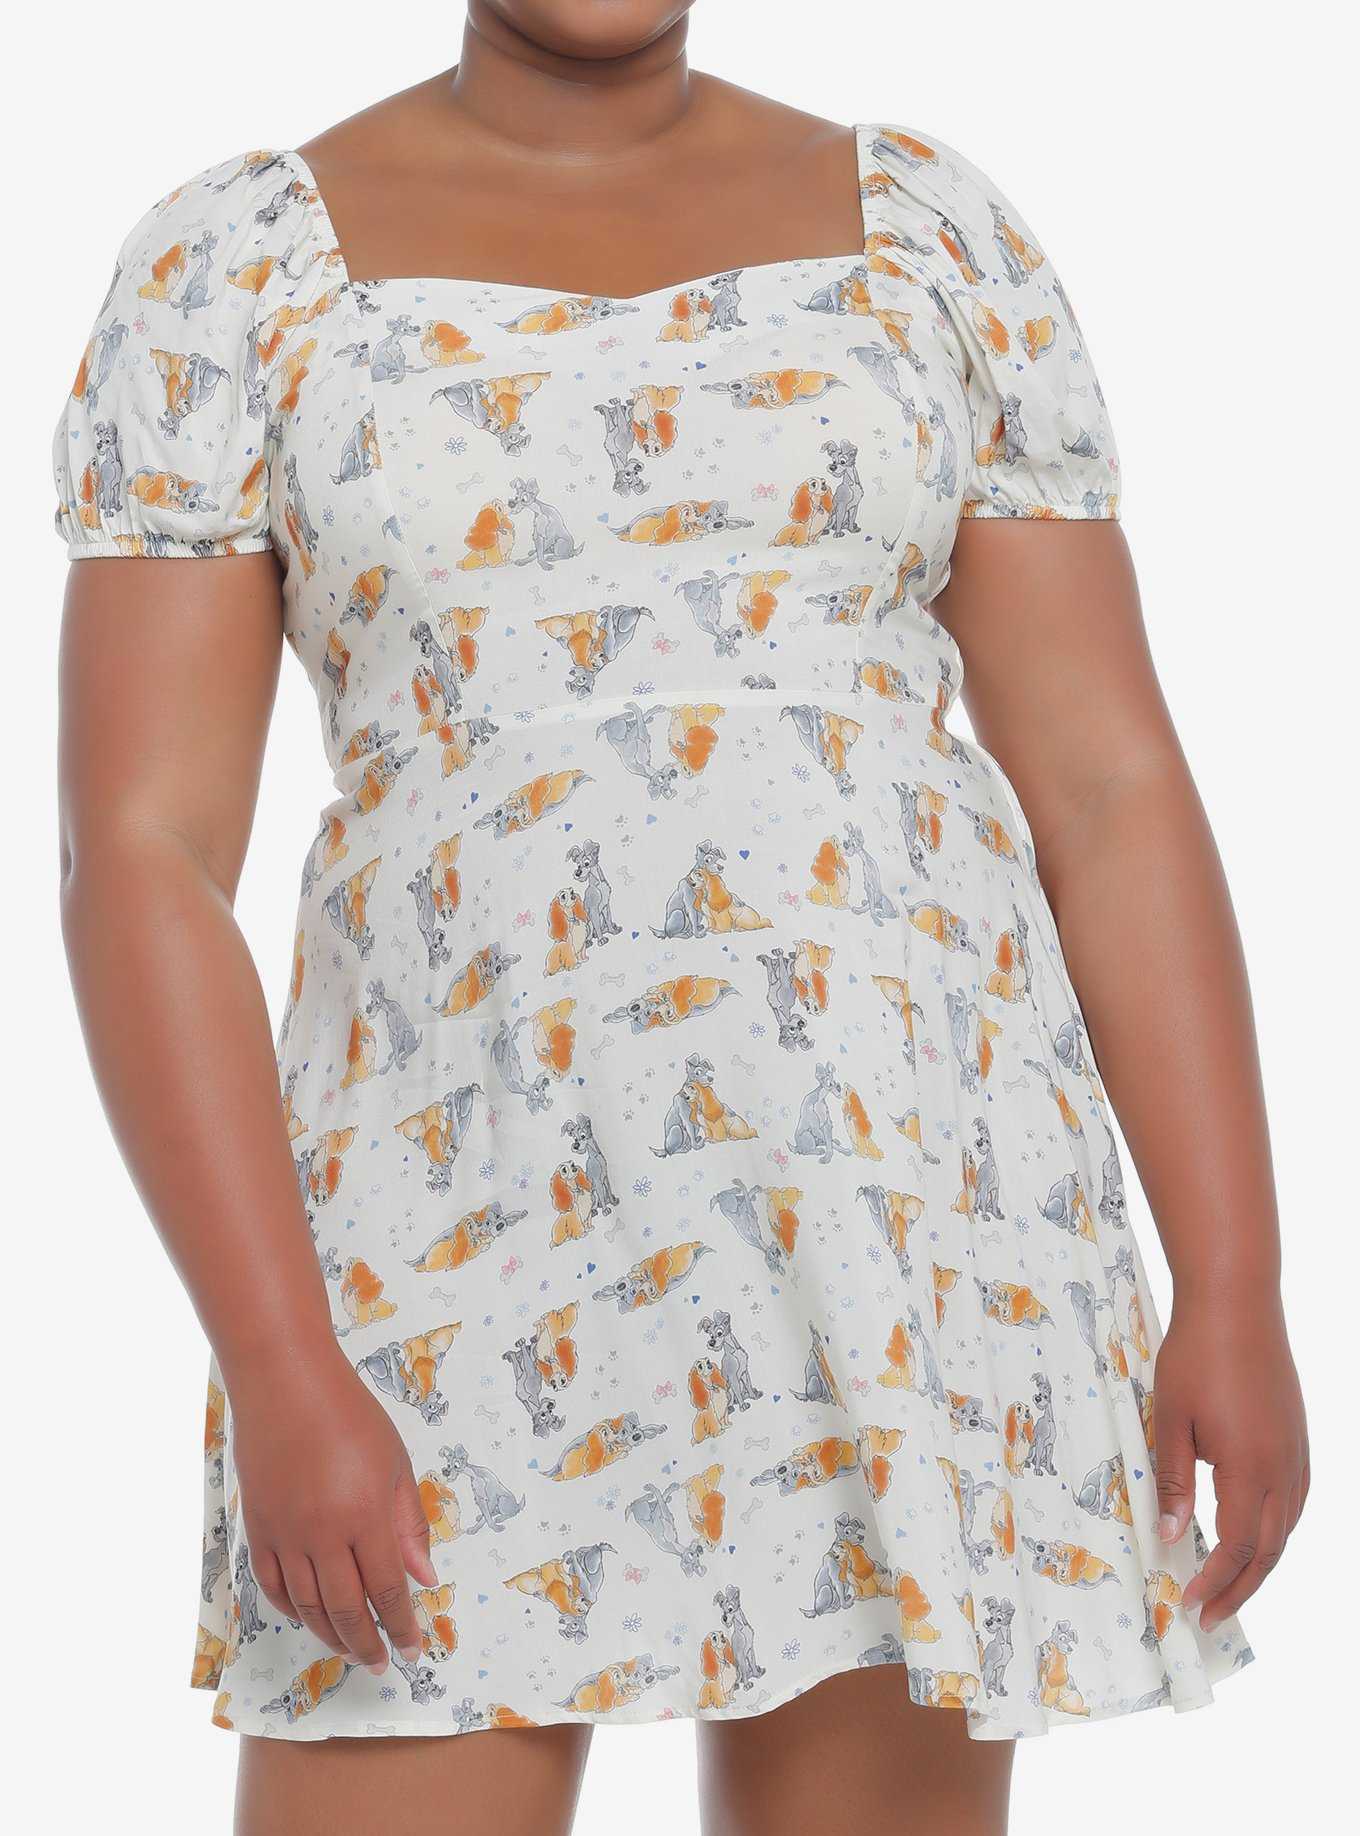 Disney Lady And The Tramp Sweetheart Dress Plus Size, , hi-res